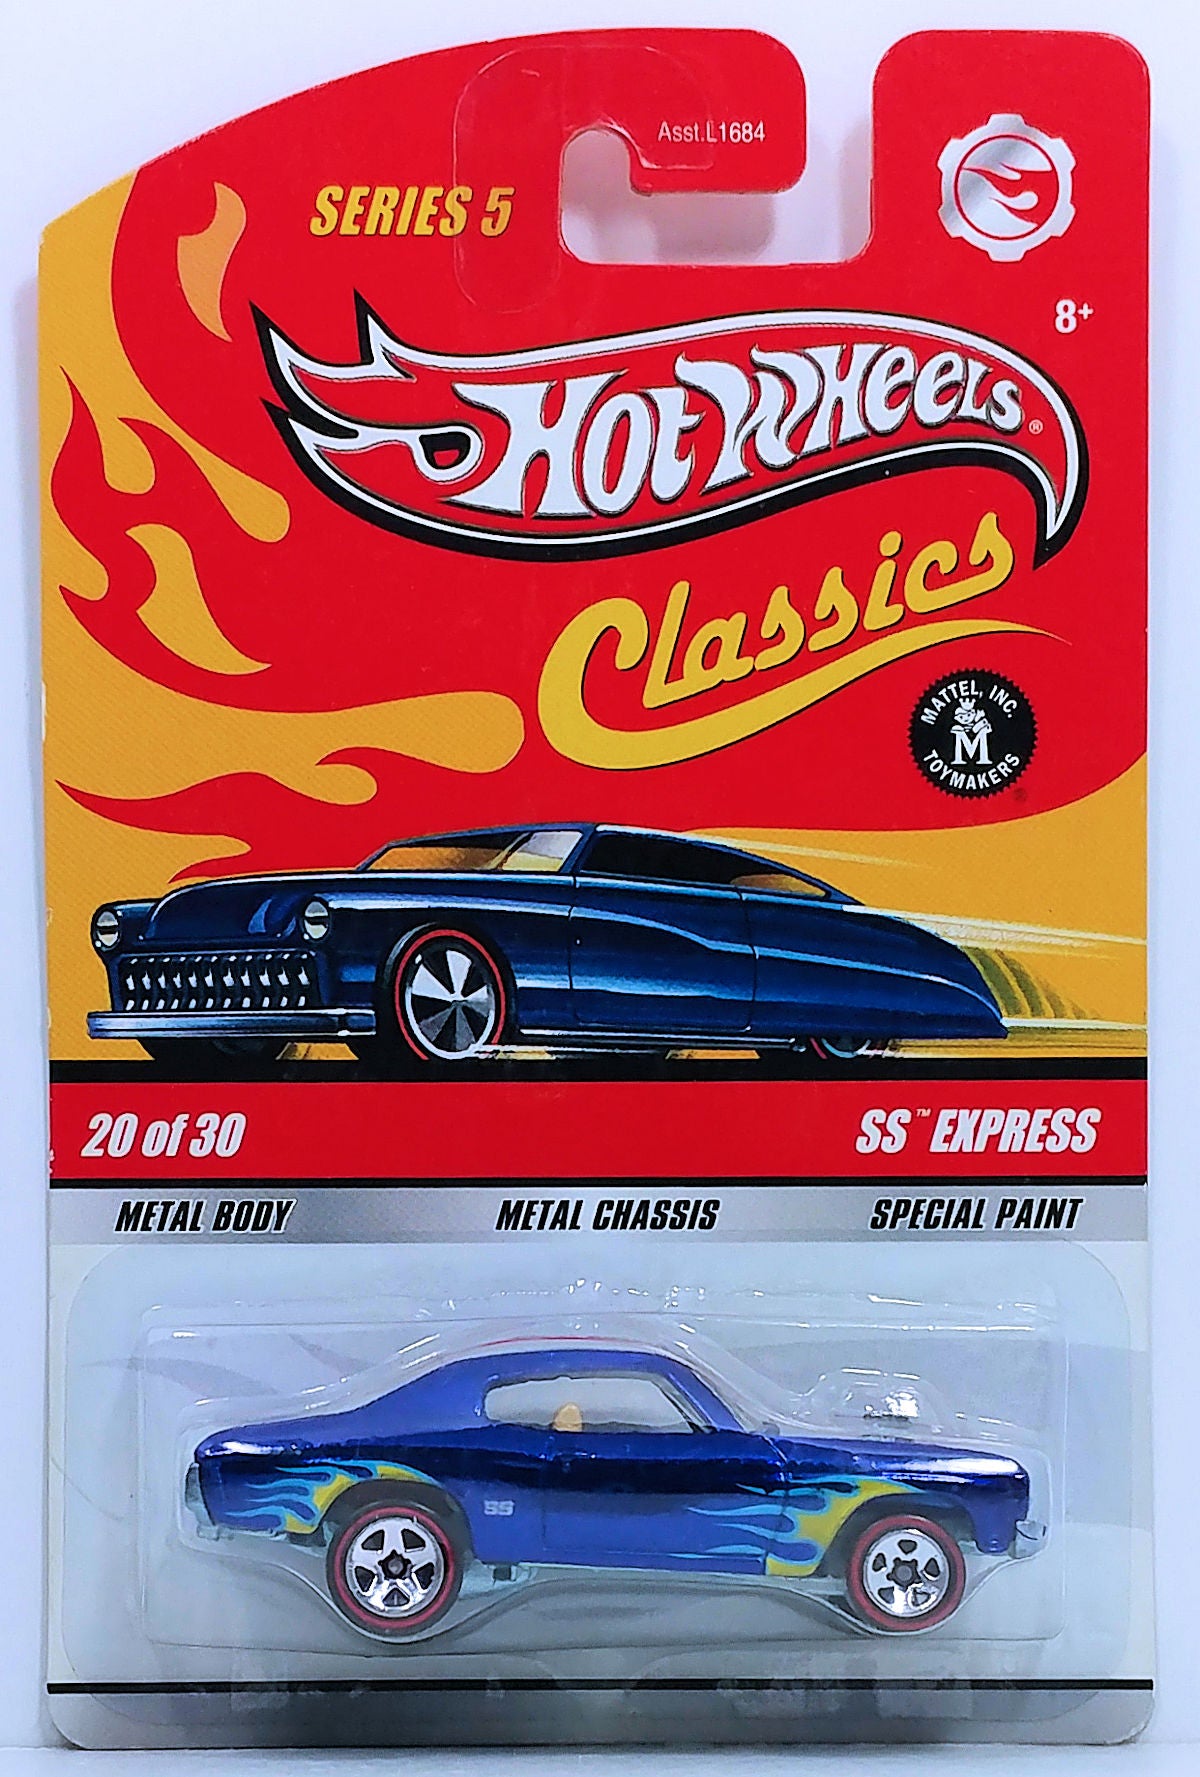 Hot Wheels 2009 - Classics Series 5 # 20/30 - SS Express - Spectraflame Blue - 5 Spokes with Red Lines - Metal/Metal